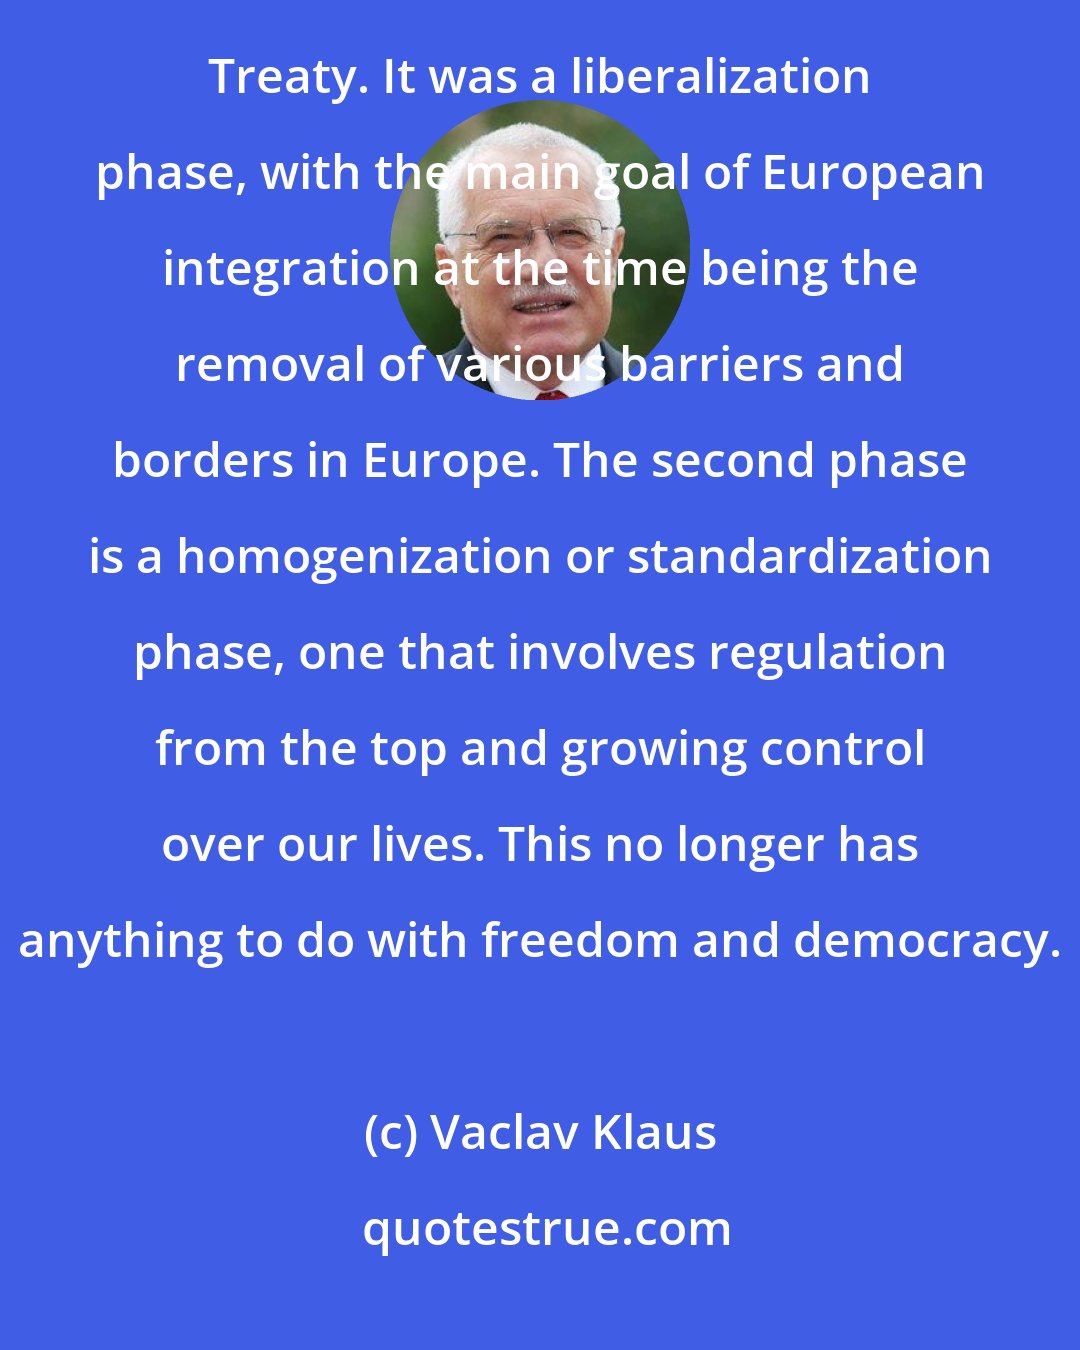 Vaclav Klaus: The development of European integration can be divided into two phases. The first era ended with the Maastricht Treaty. It was a liberalization phase, with the main goal of European integration at the time being the removal of various barriers and borders in Europe. The second phase is a homogenization or standardization phase, one that involves regulation from the top and growing control over our lives. This no longer has anything to do with freedom and democracy.